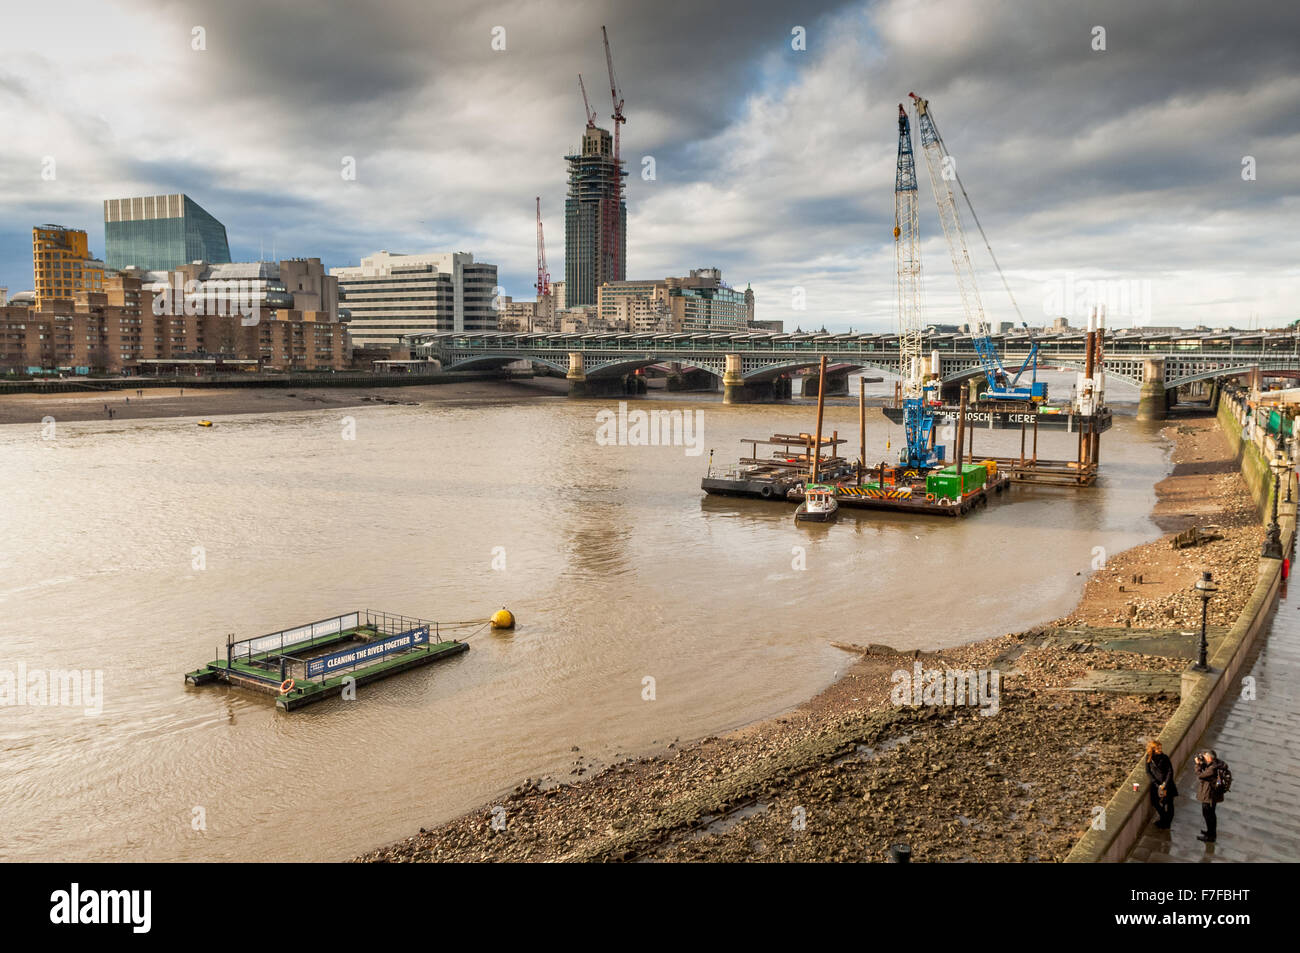 The view from The Millennium Bridge London looking over The River Thames towards the shore line at low tide. Stock Photo